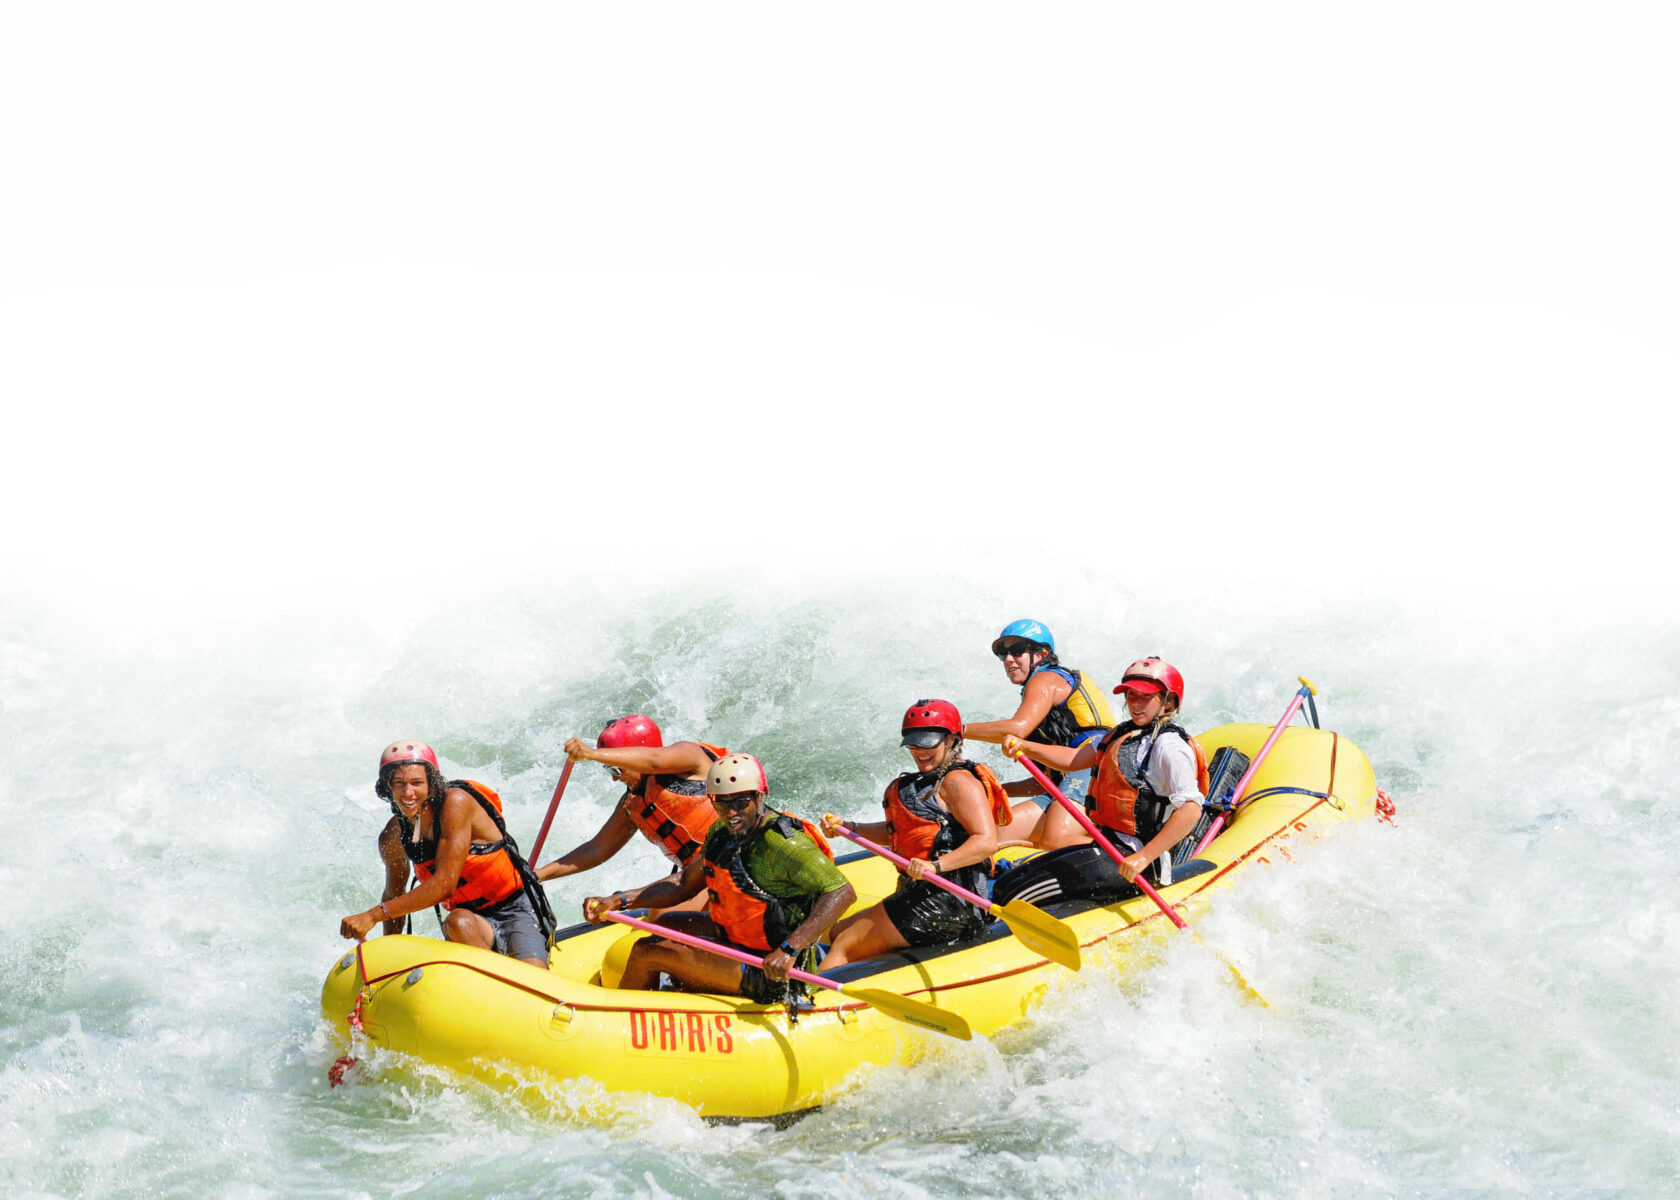 Whitewater river rafting on a river in California.